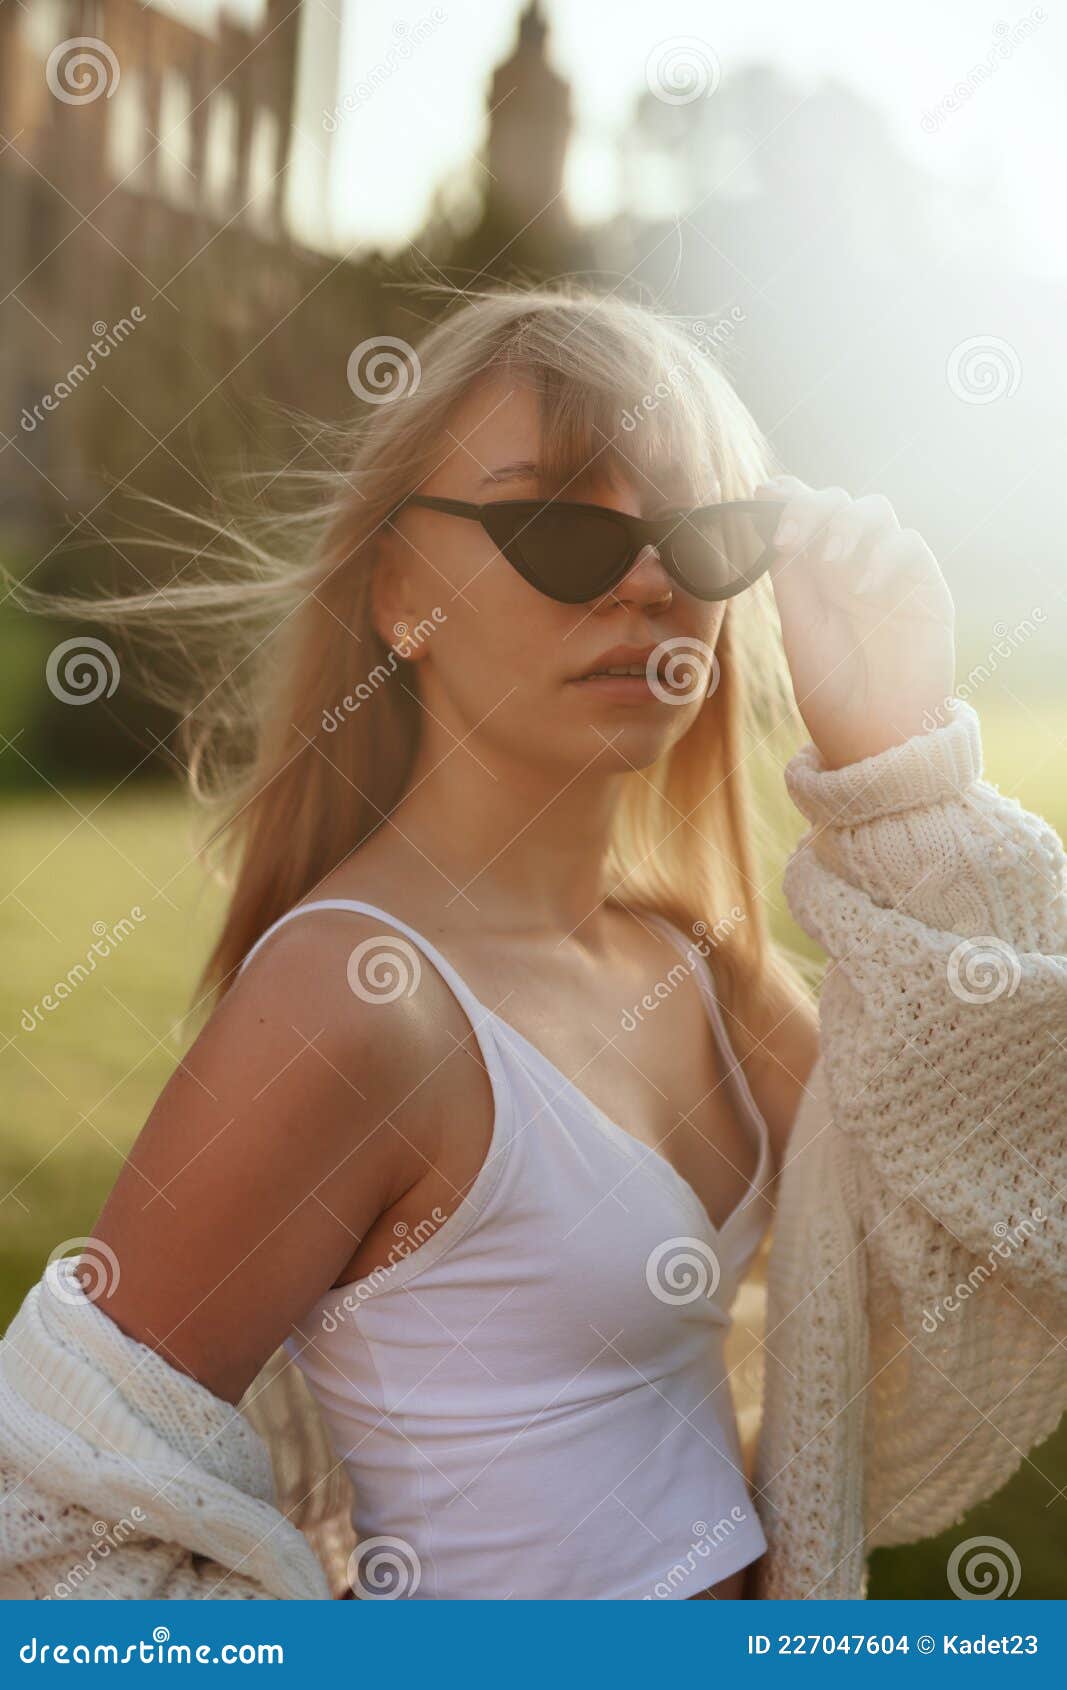 https://thumbs.dreamstime.com/z/fashionable-young-cute-teen-sunglasses-aesthetic-portrait-cheerful-happy-teen-summer-sun-flares-fashion-aesthetic-227047604.jpg